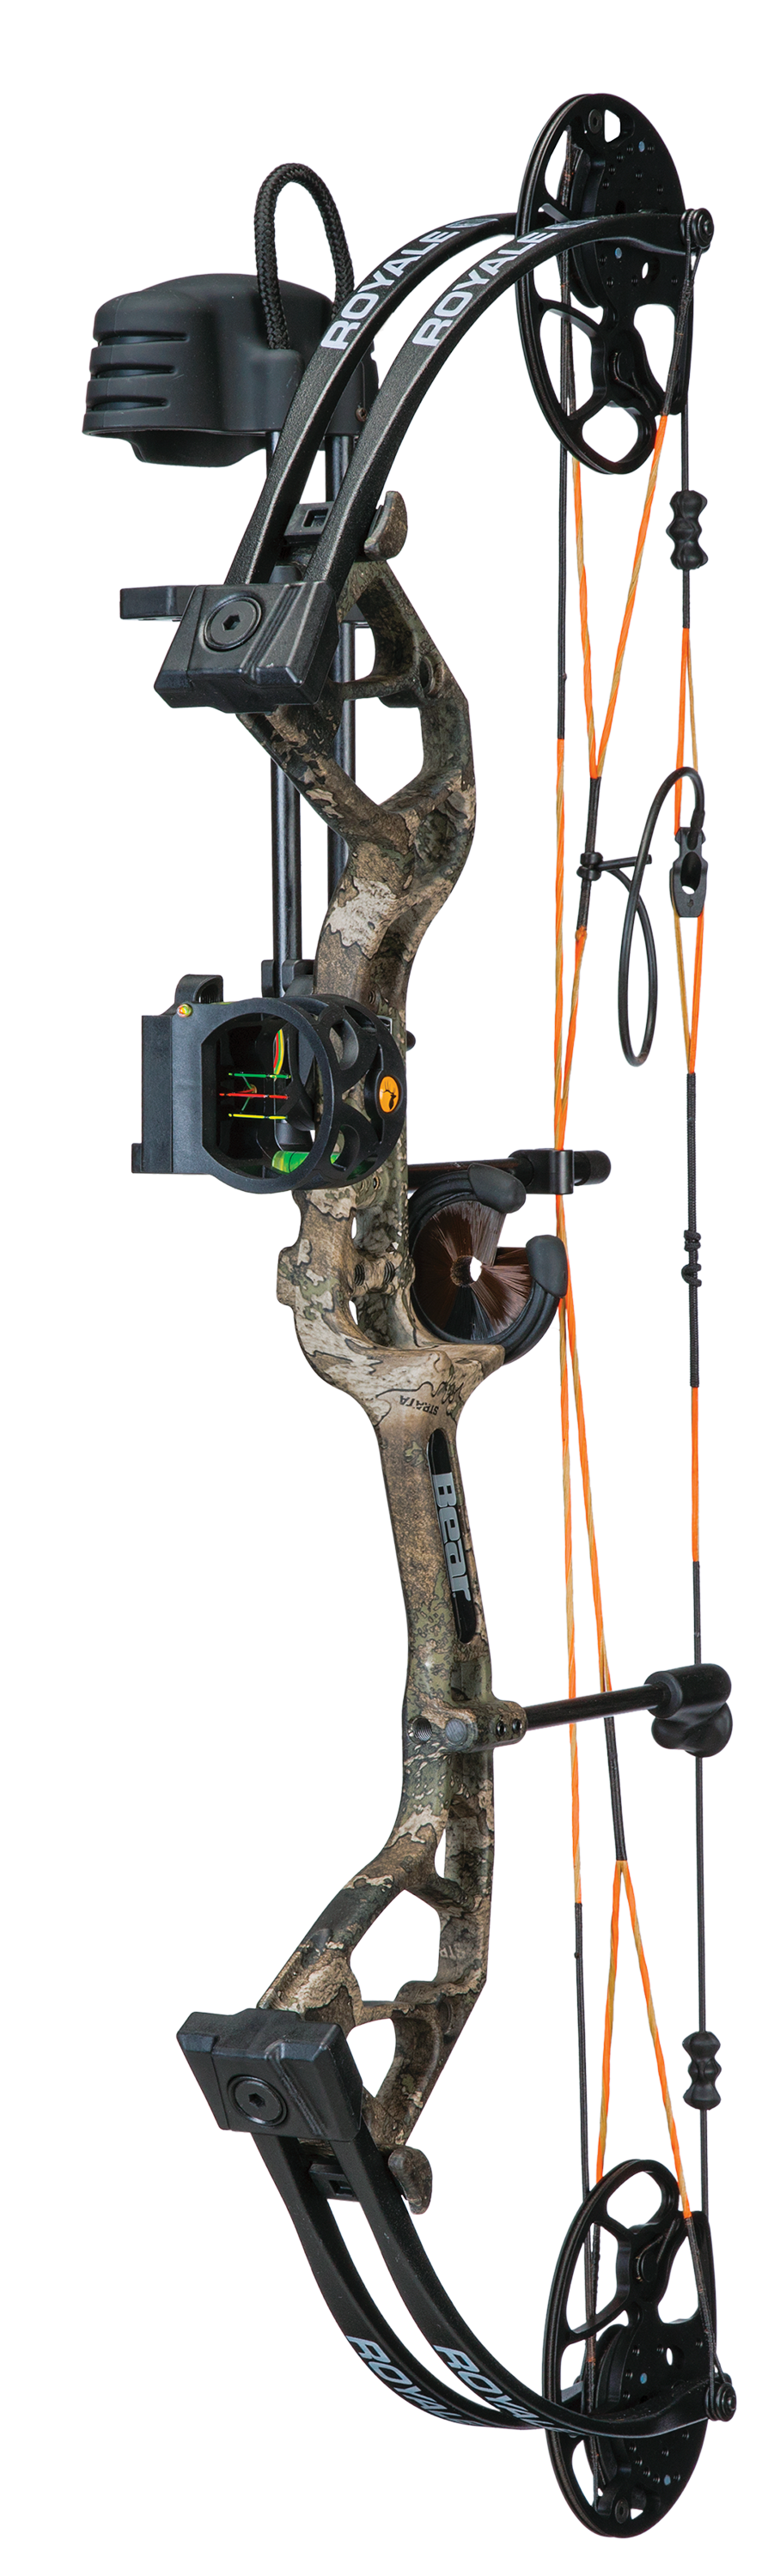 Bear Archery Royale RTH Compound Bow Package - 50 lbs. -  Right Hand - TrueTimber Strata